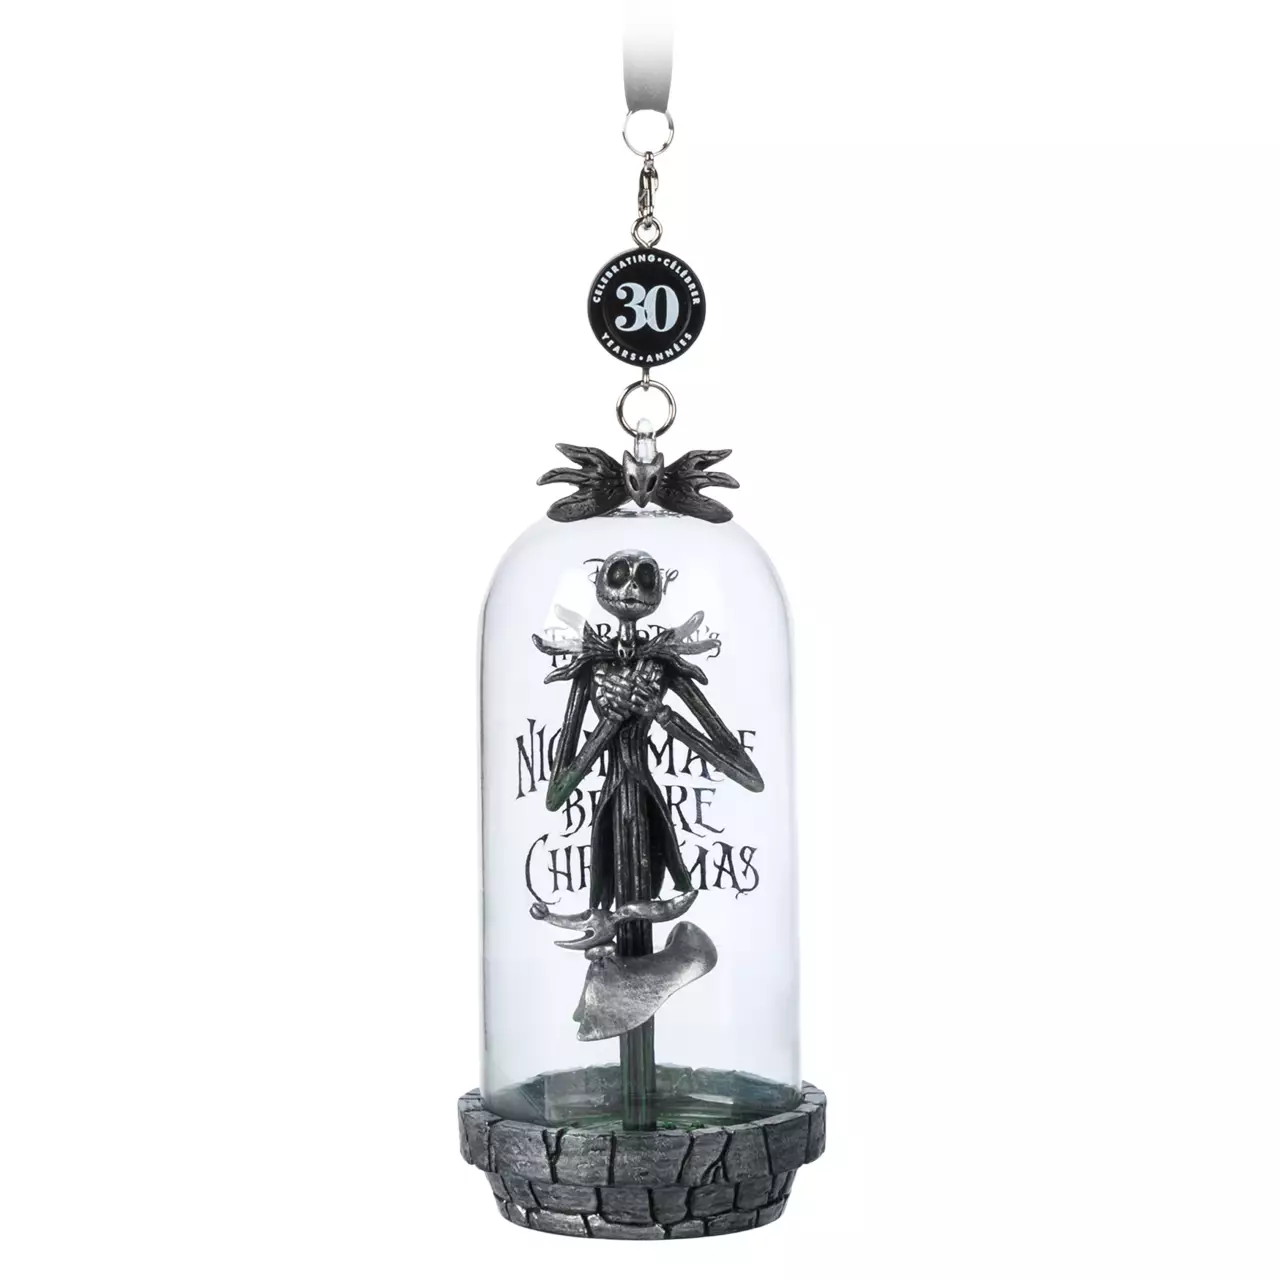 The Nightmare Before Christmas Legacy Sketchbook Christmas Ornament – 30th Anniversary